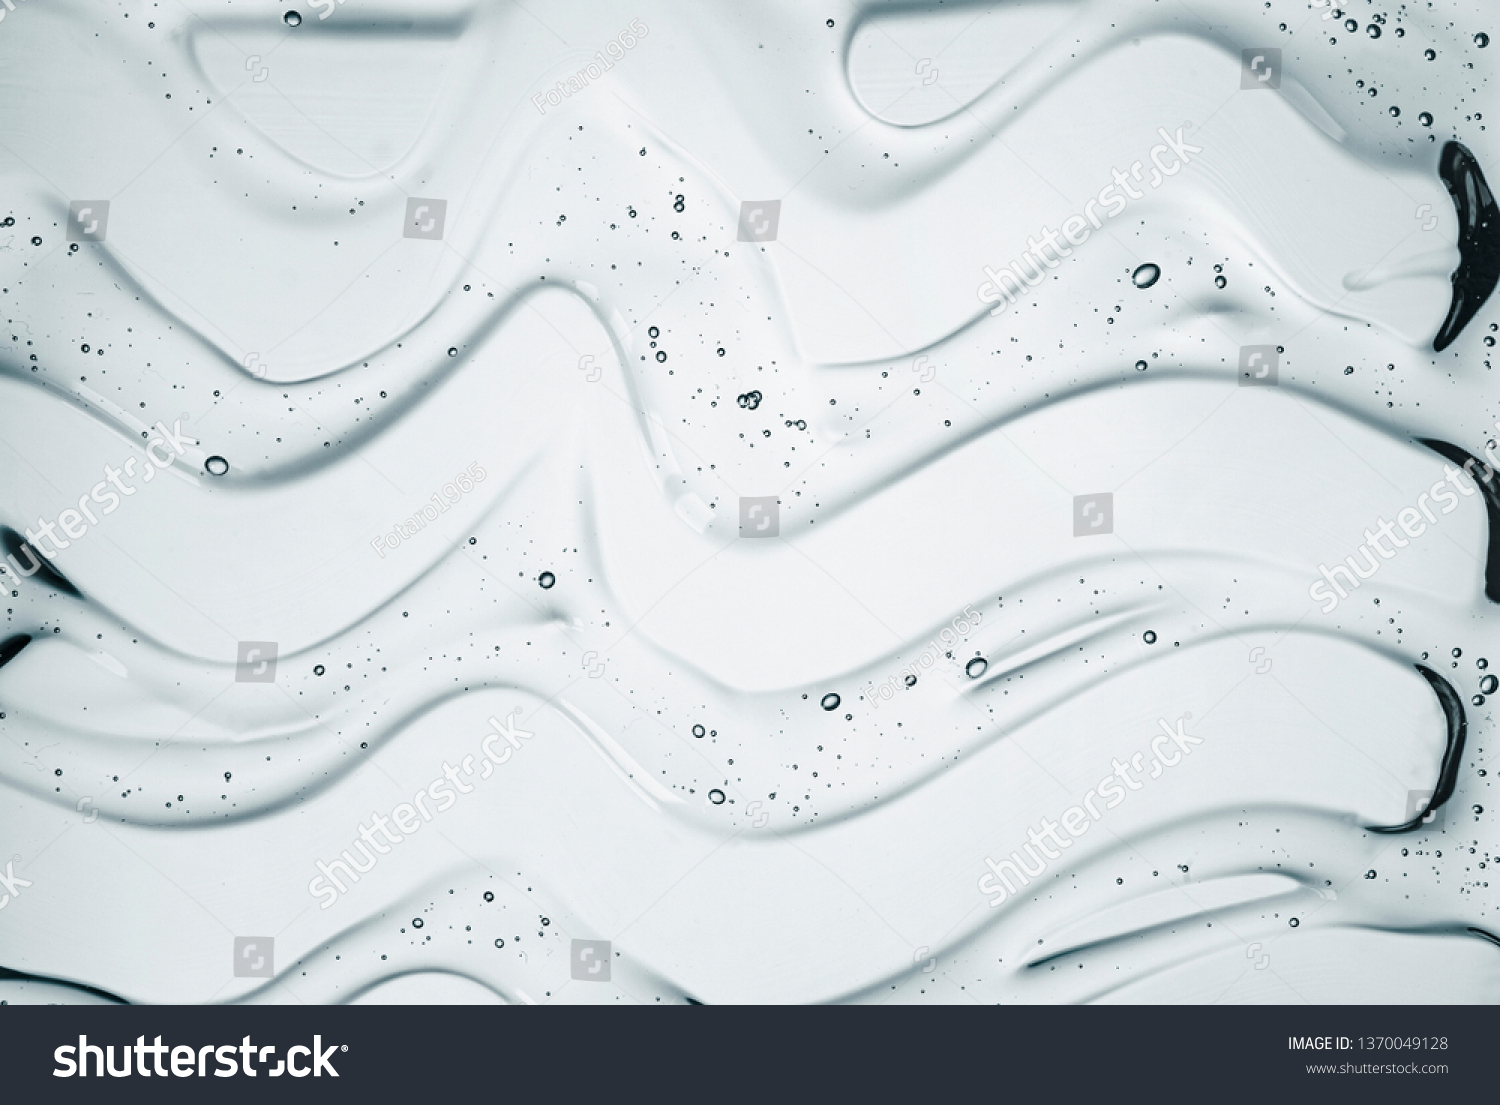 Cream gel gray blue transparent cosmetic sample texture with bubbles isolated on white background #1370049128